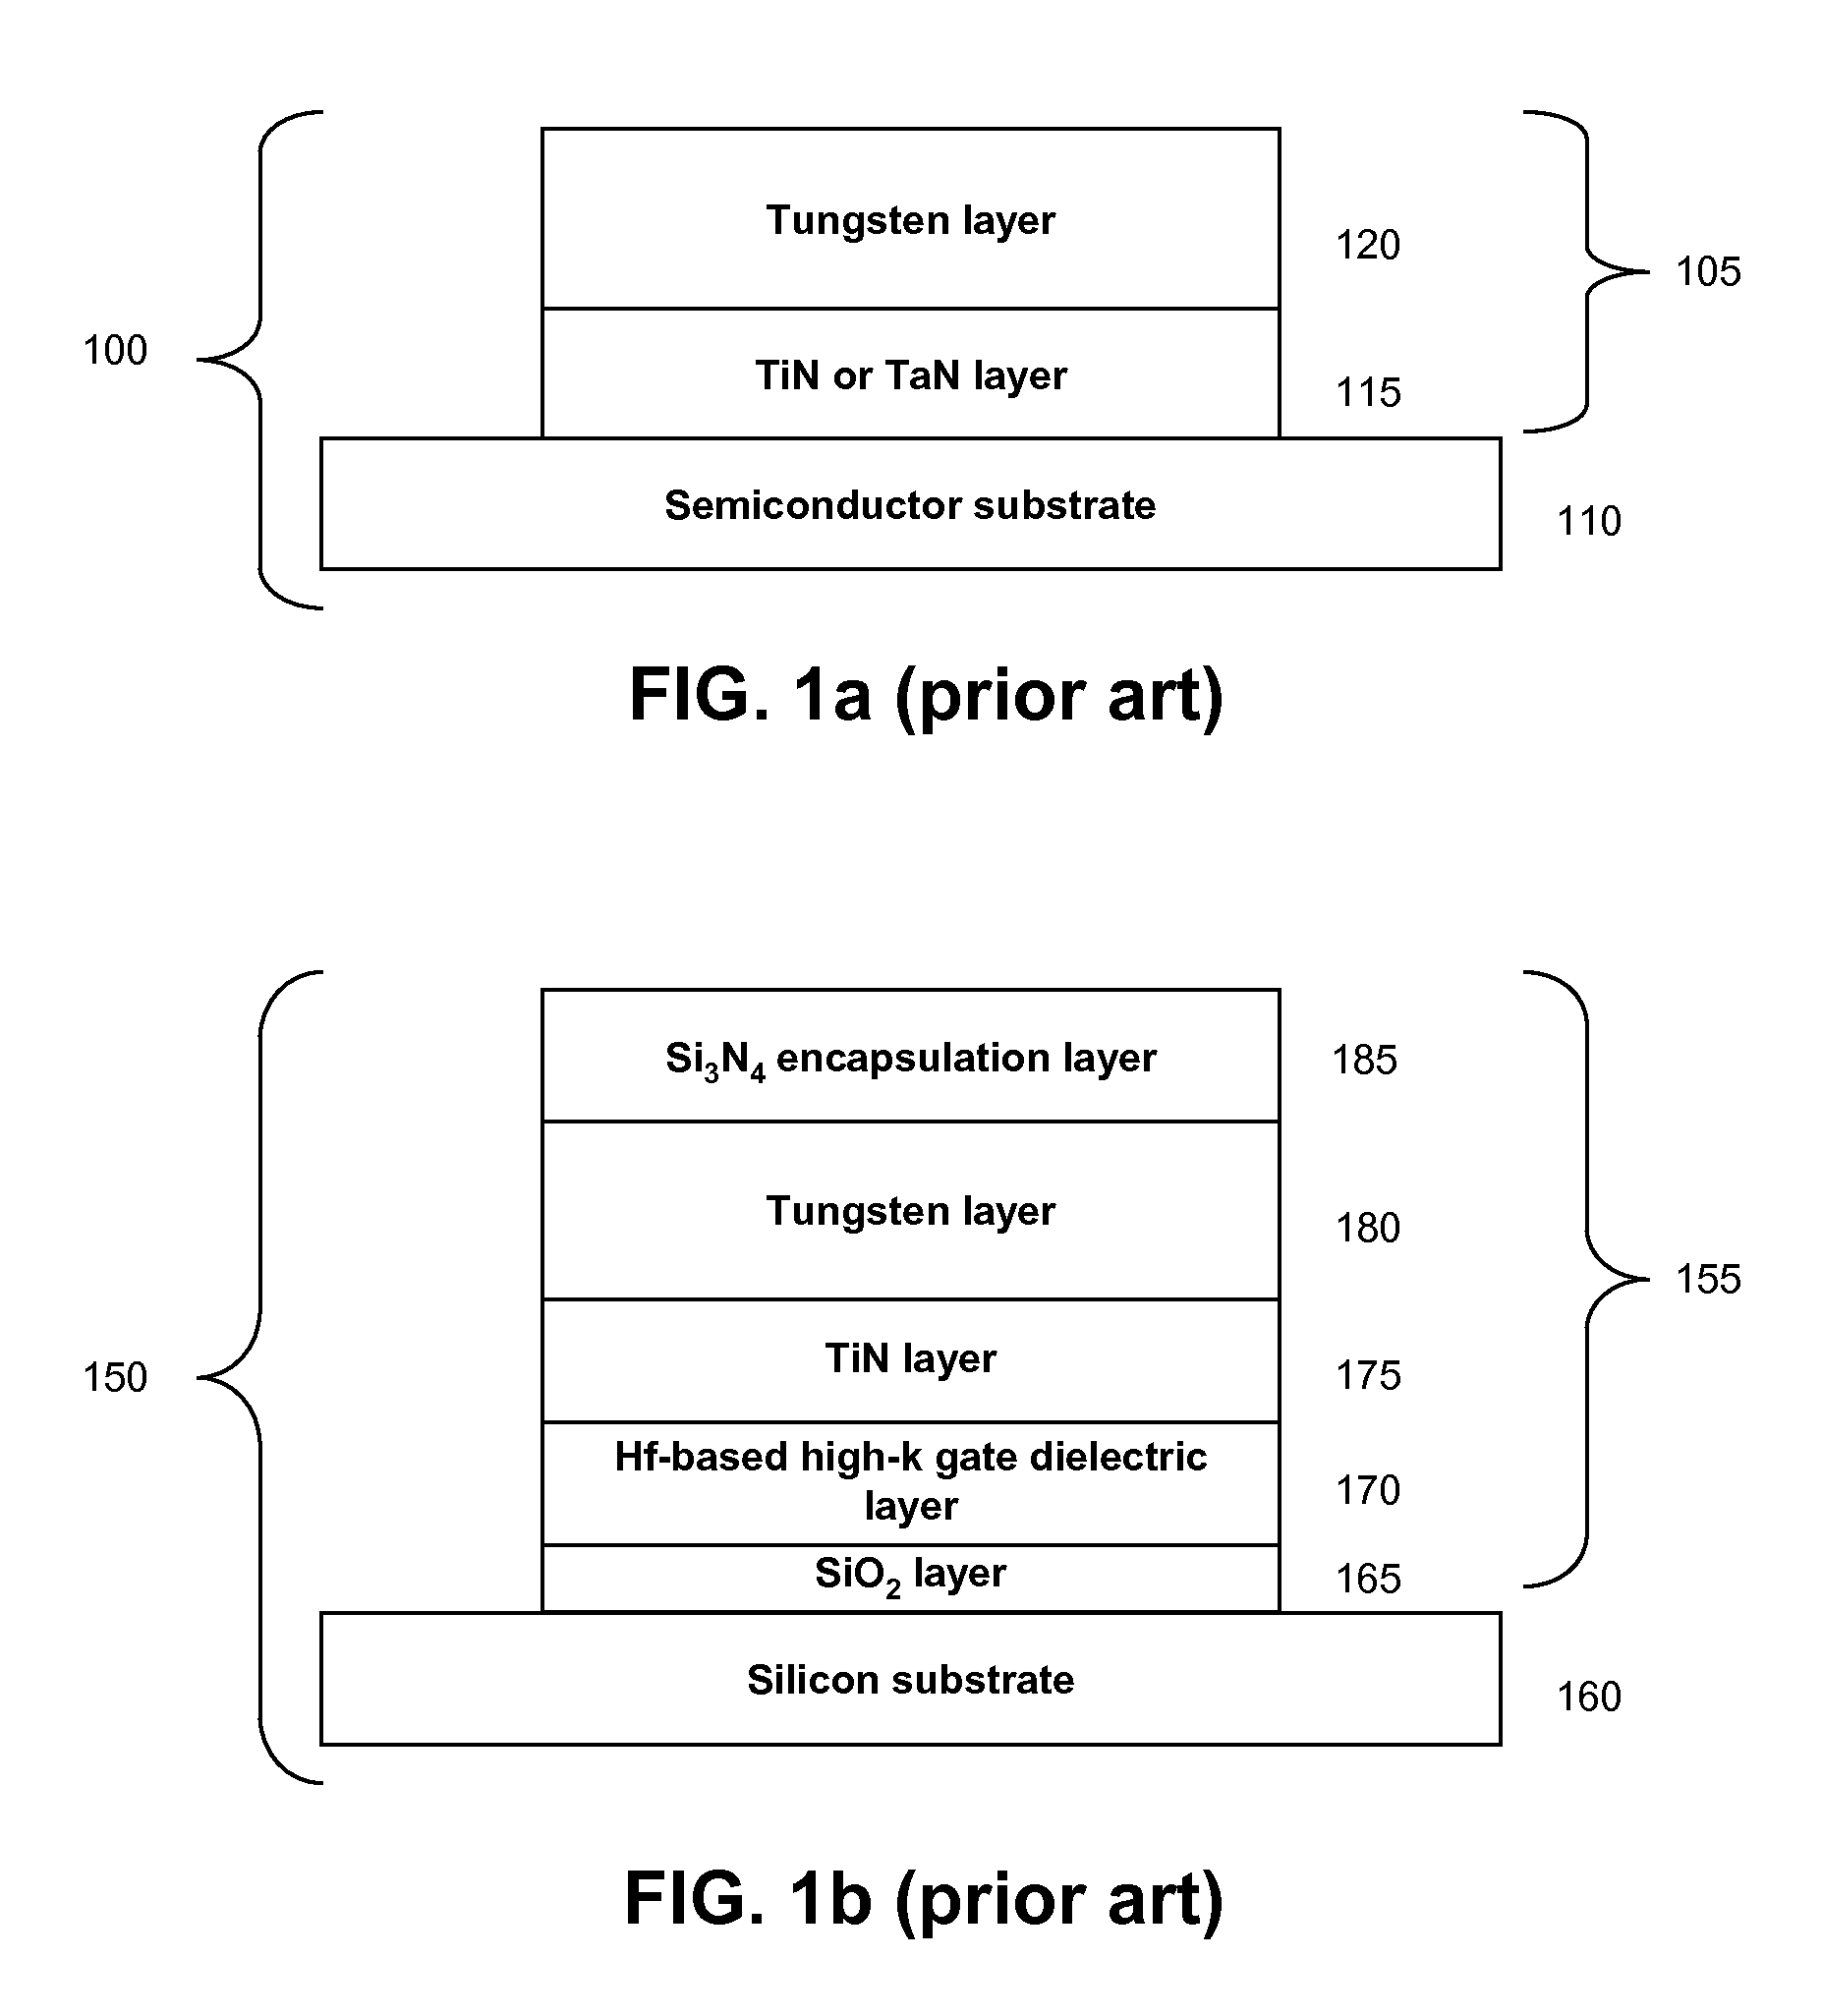 Large-grain, low-resistivity tungsten on a conductive compound